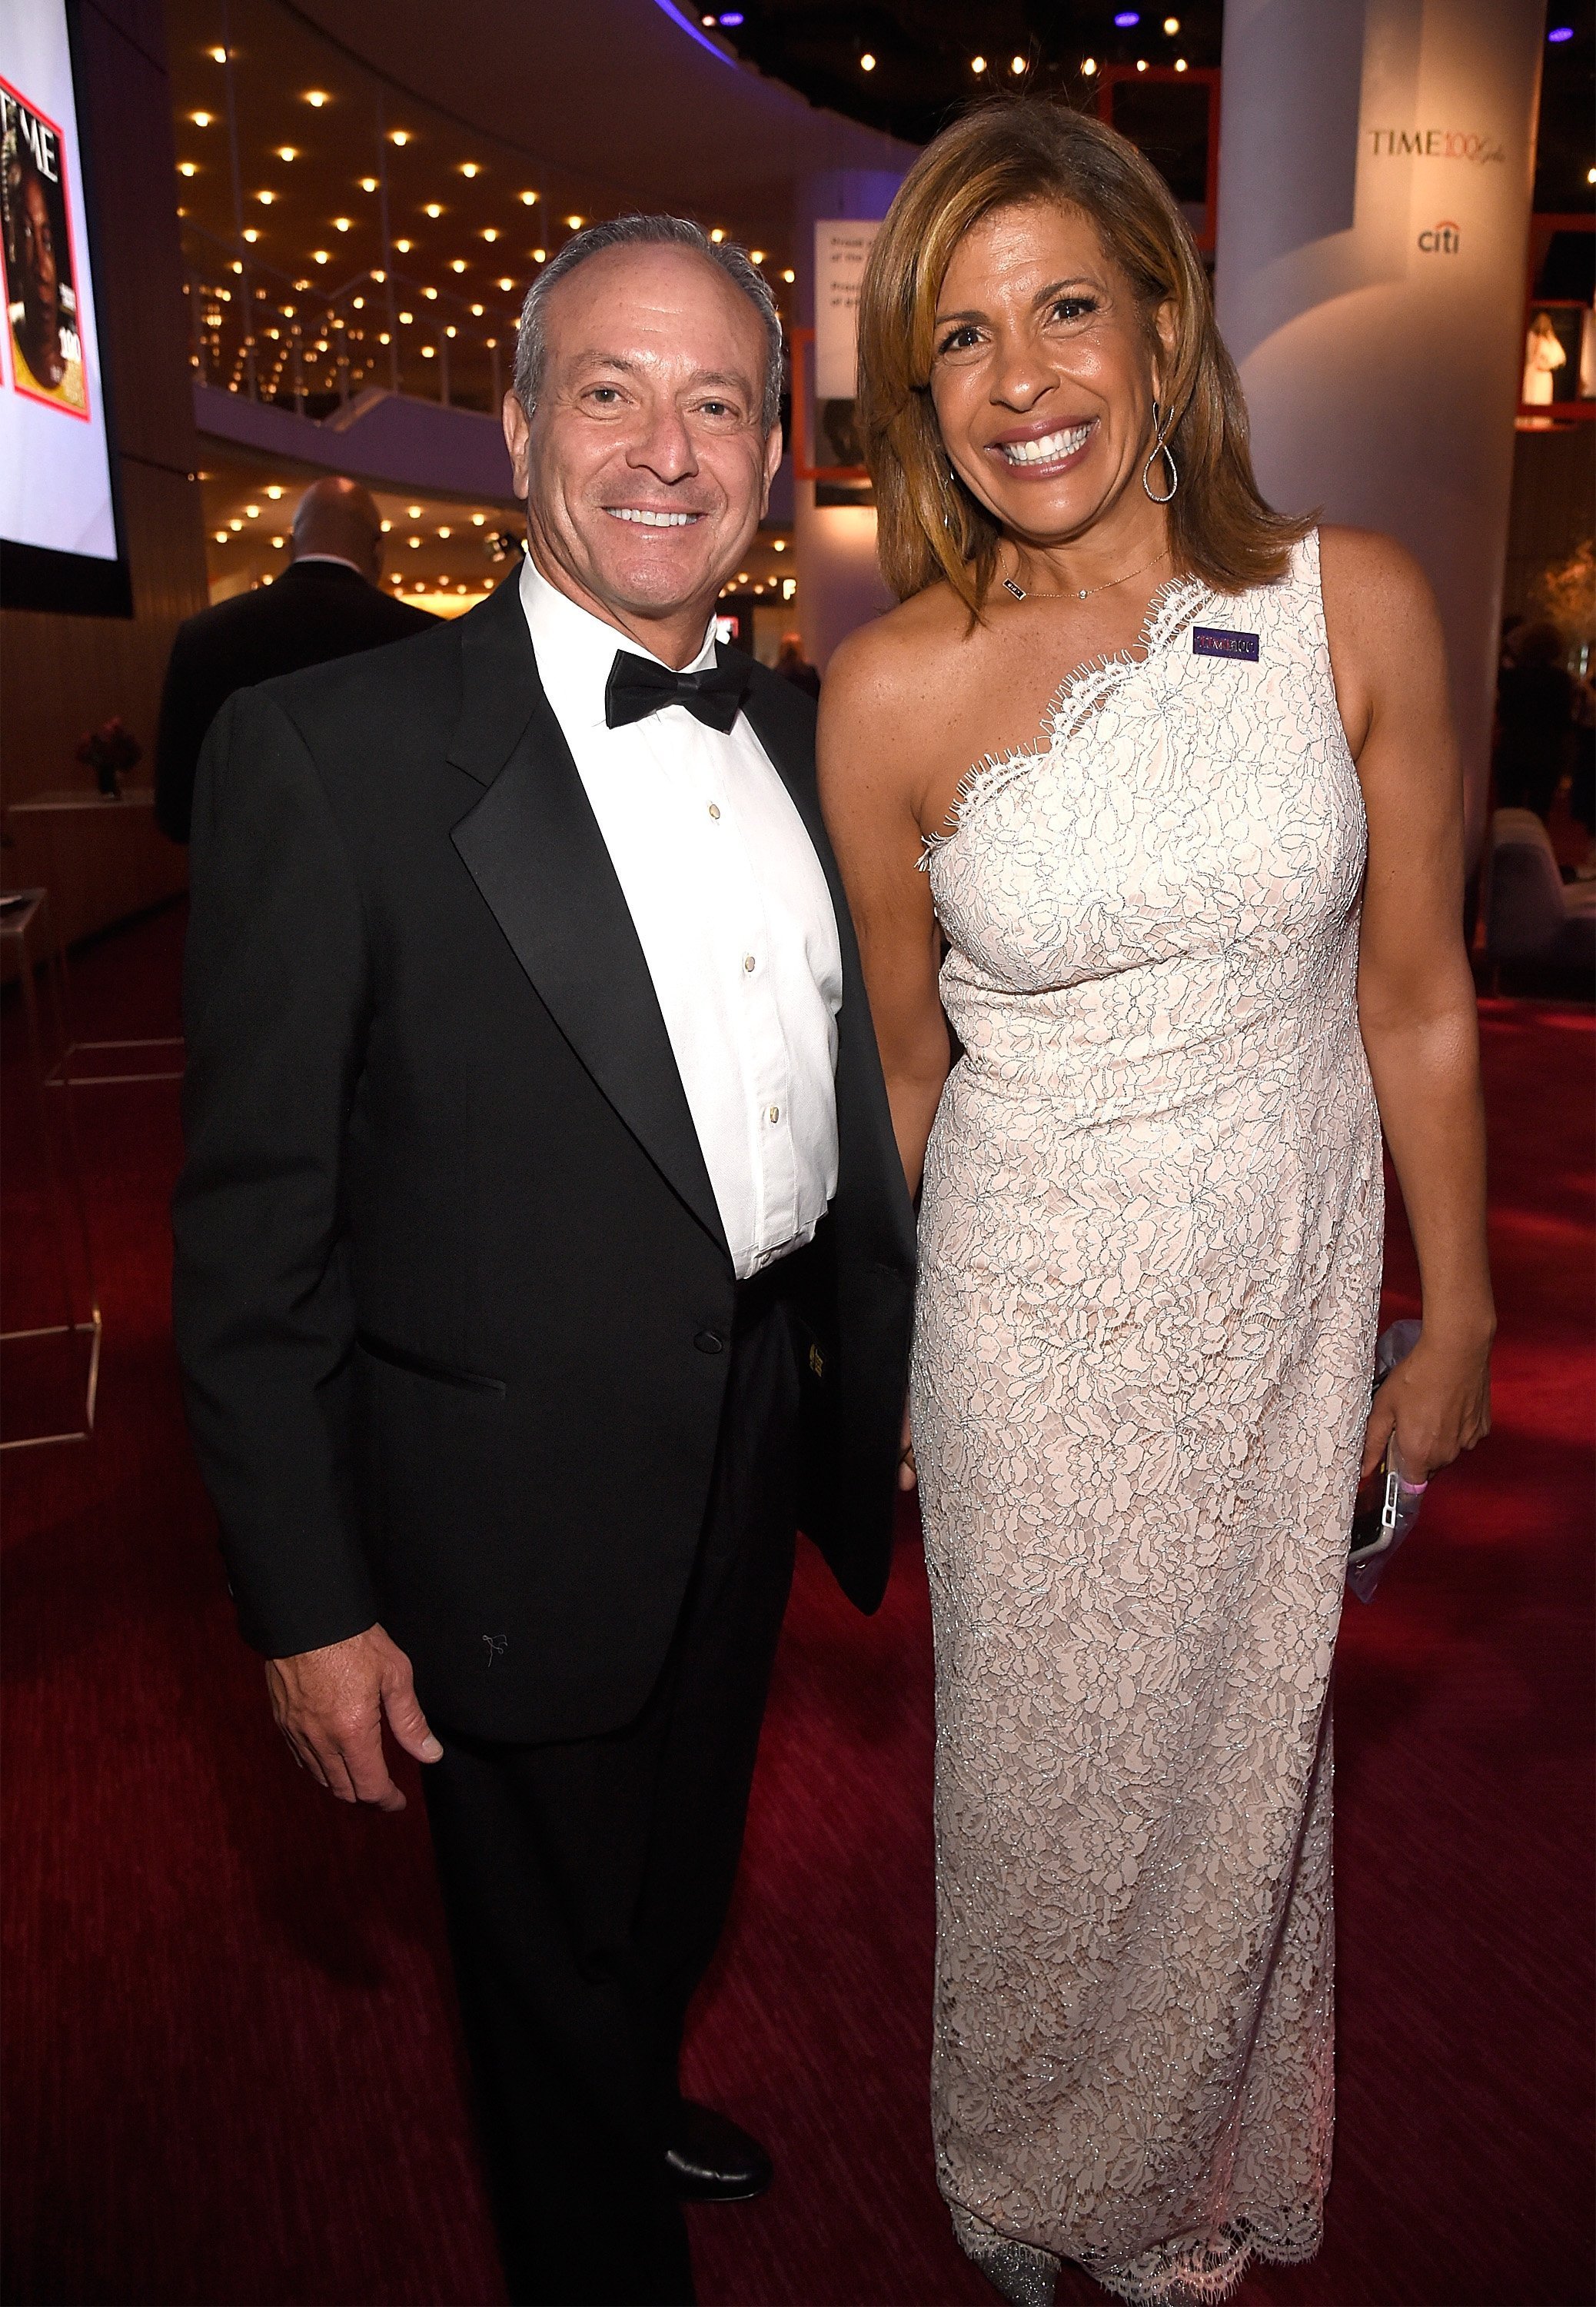 Joel Schiffman and Hoda Kotb attend the 2018 Time 100 Gala at Jazz at Lincoln Center on April 24, 2018. | Source: Getty Images